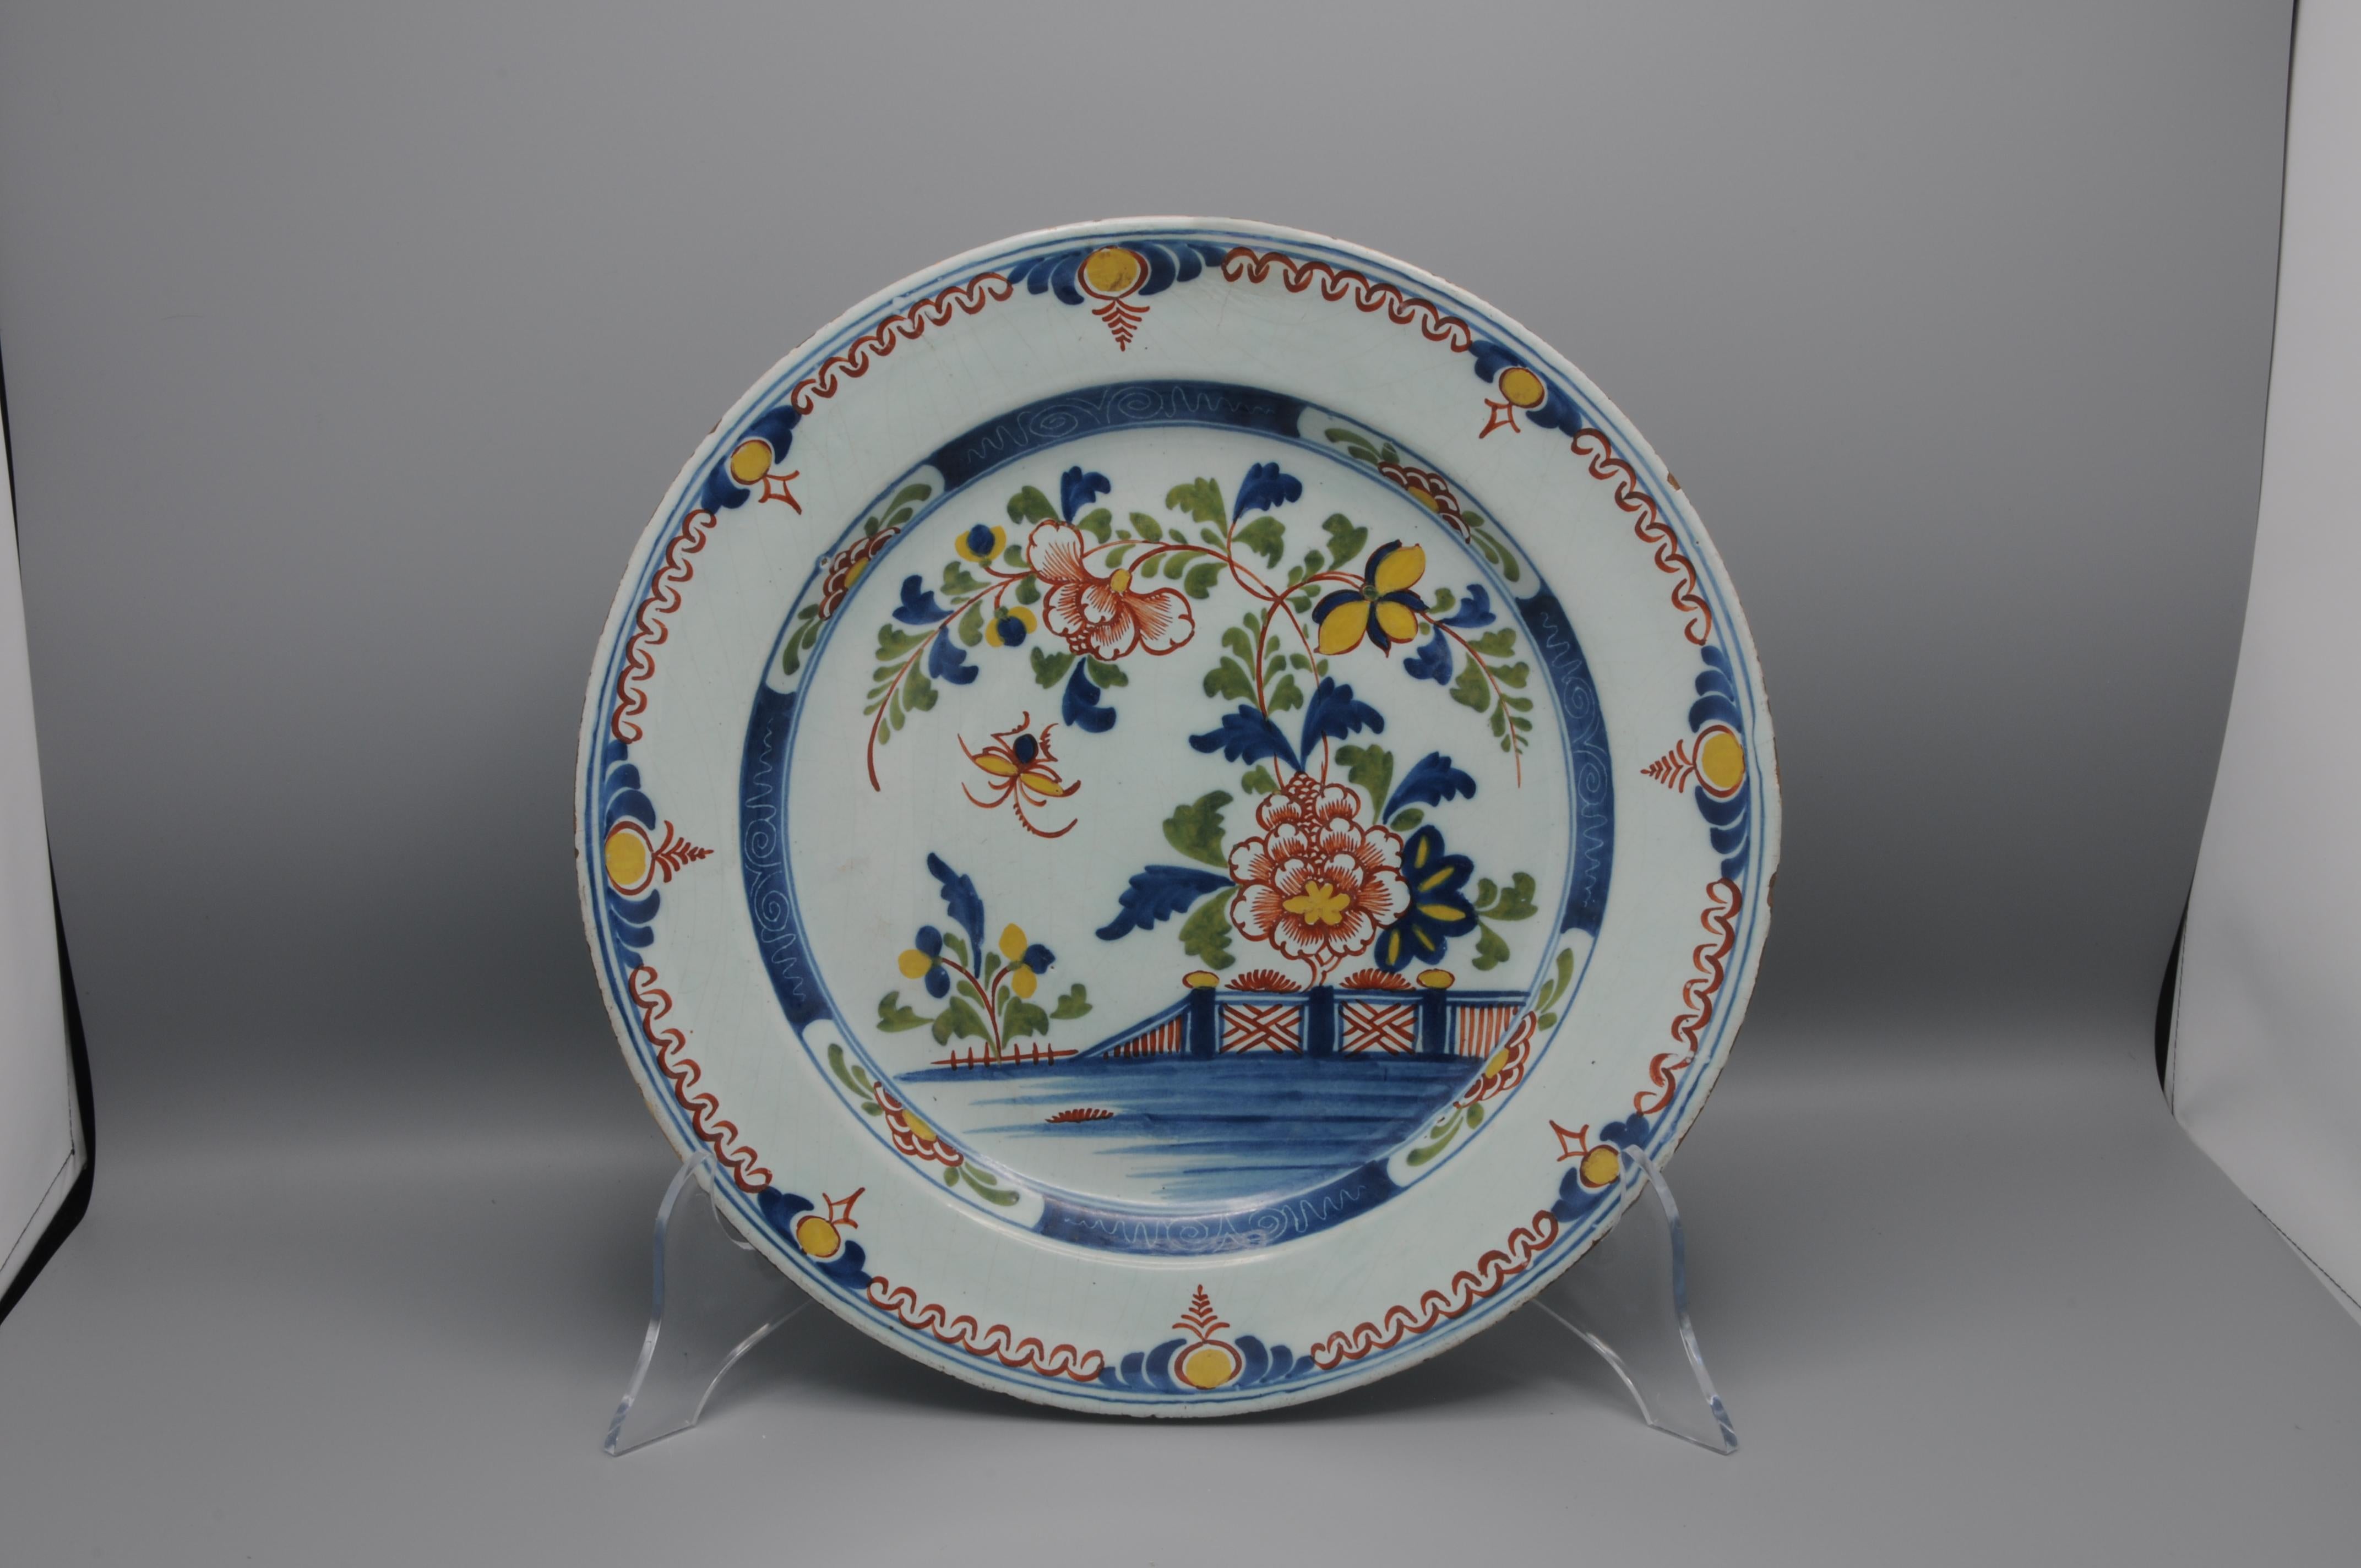 Delft Polychrome Delftware platter with fine chinoiserie decoration of a central depiction of a blossoming peony against a fence.

Unmarked
Fair condition; some chipping professionally restored (see pictures) and slight wear to the rim.